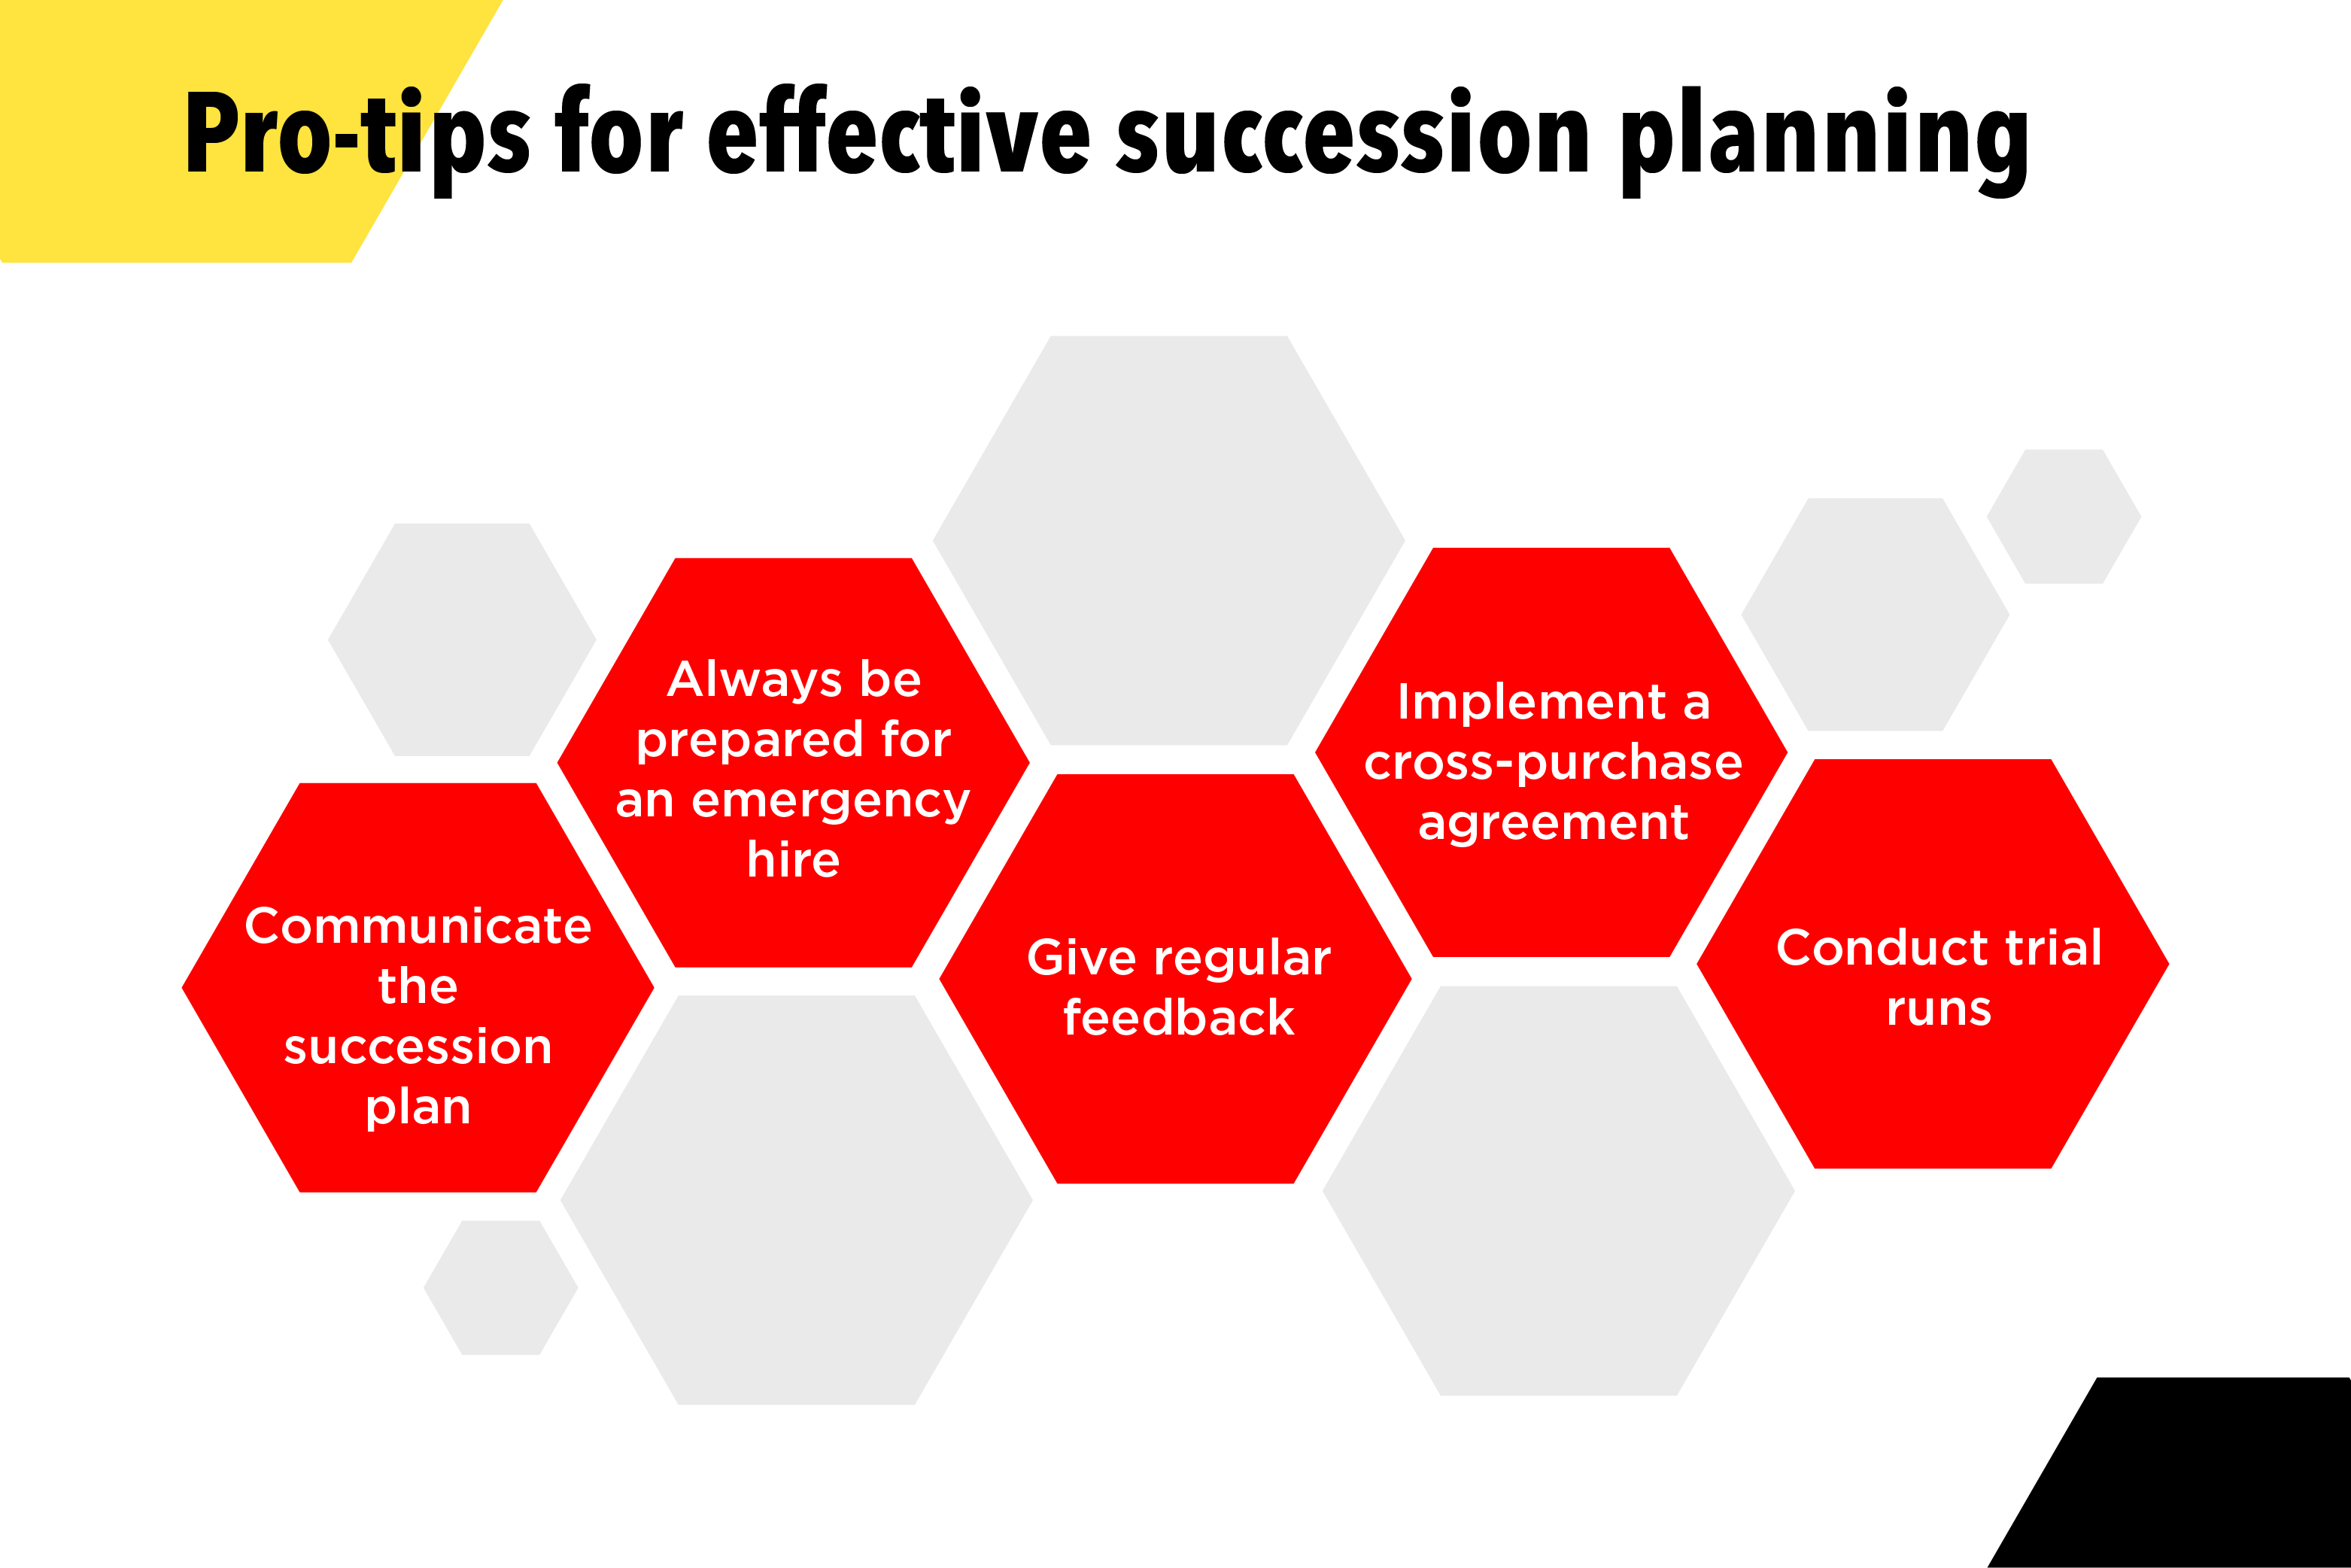 Pro-tips for effective succession planning